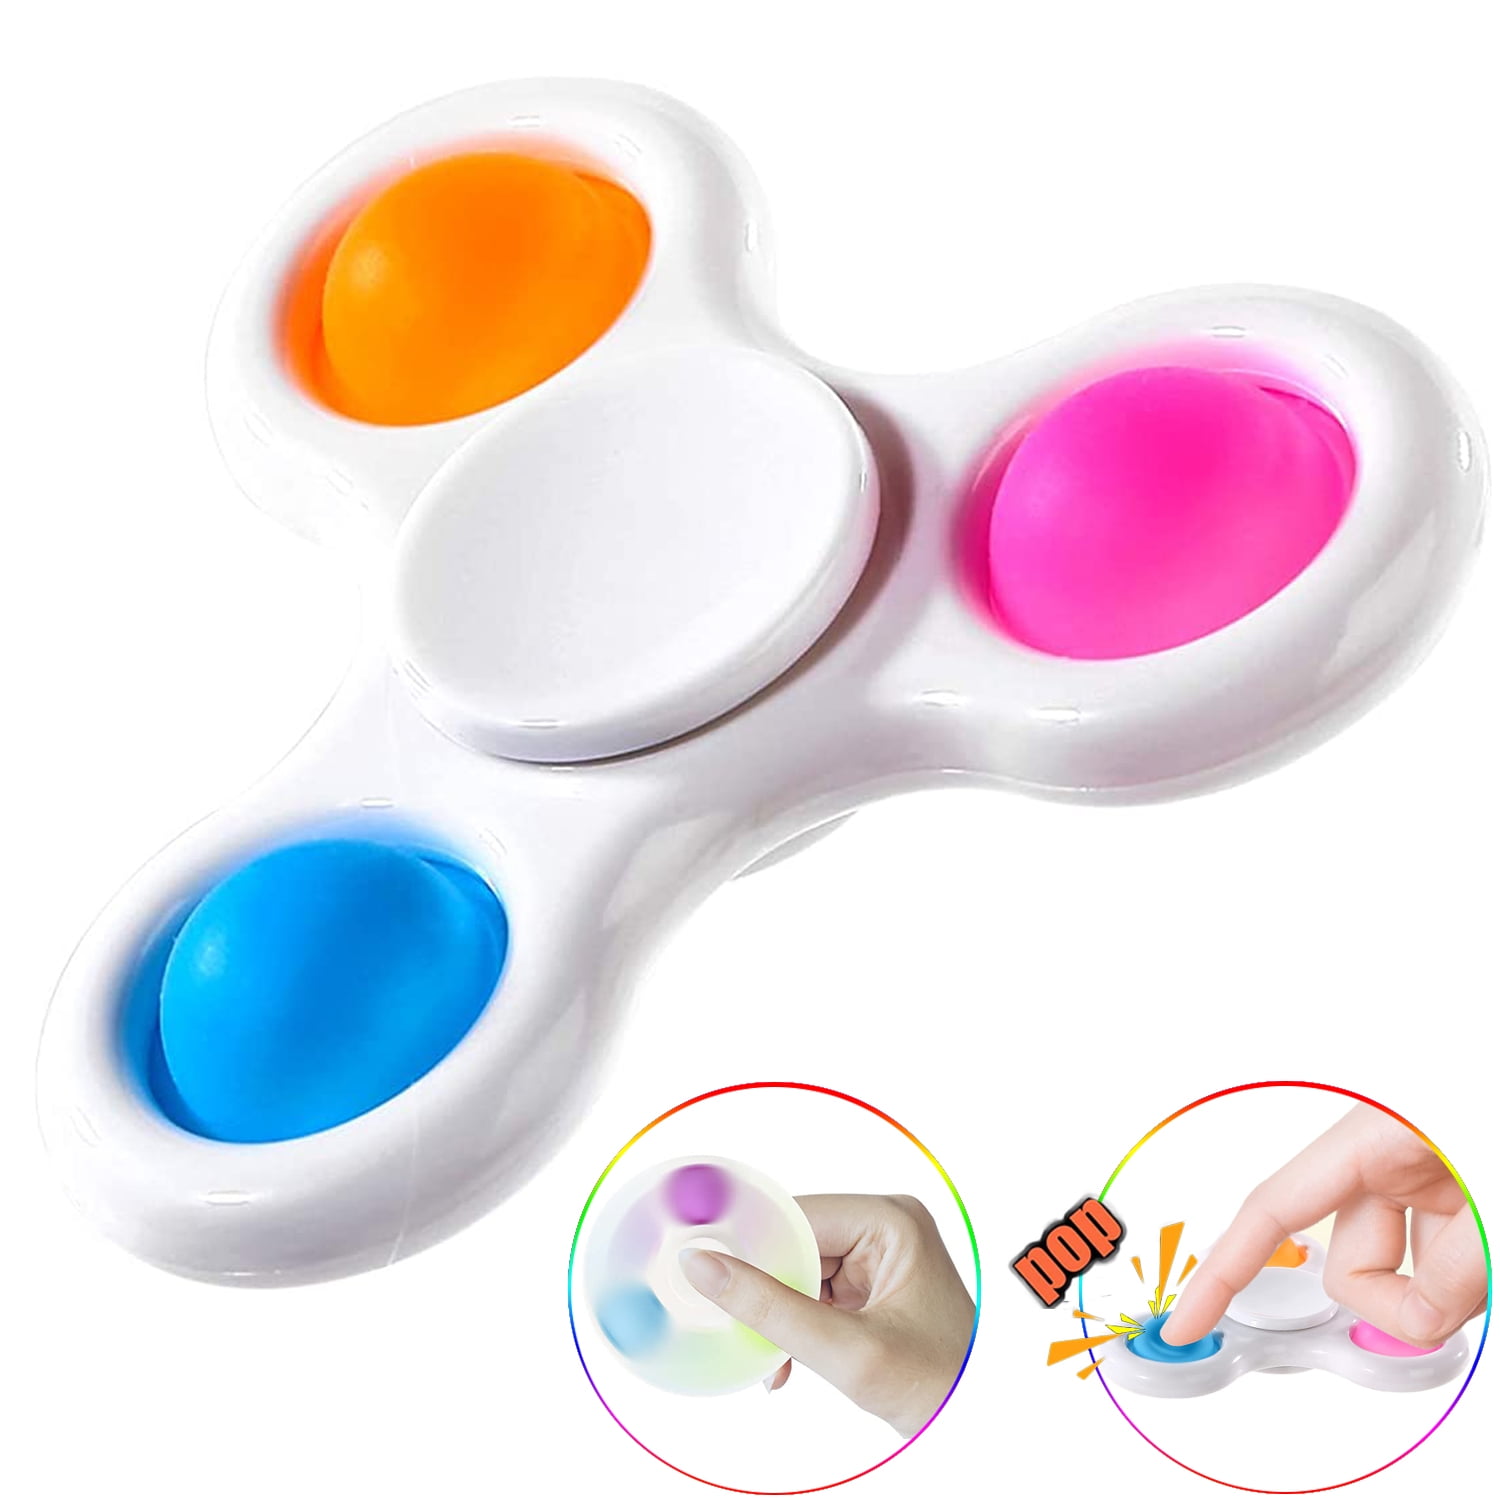 REVOQ World's First Multi-Functional Sensory Toy for kids and adults 